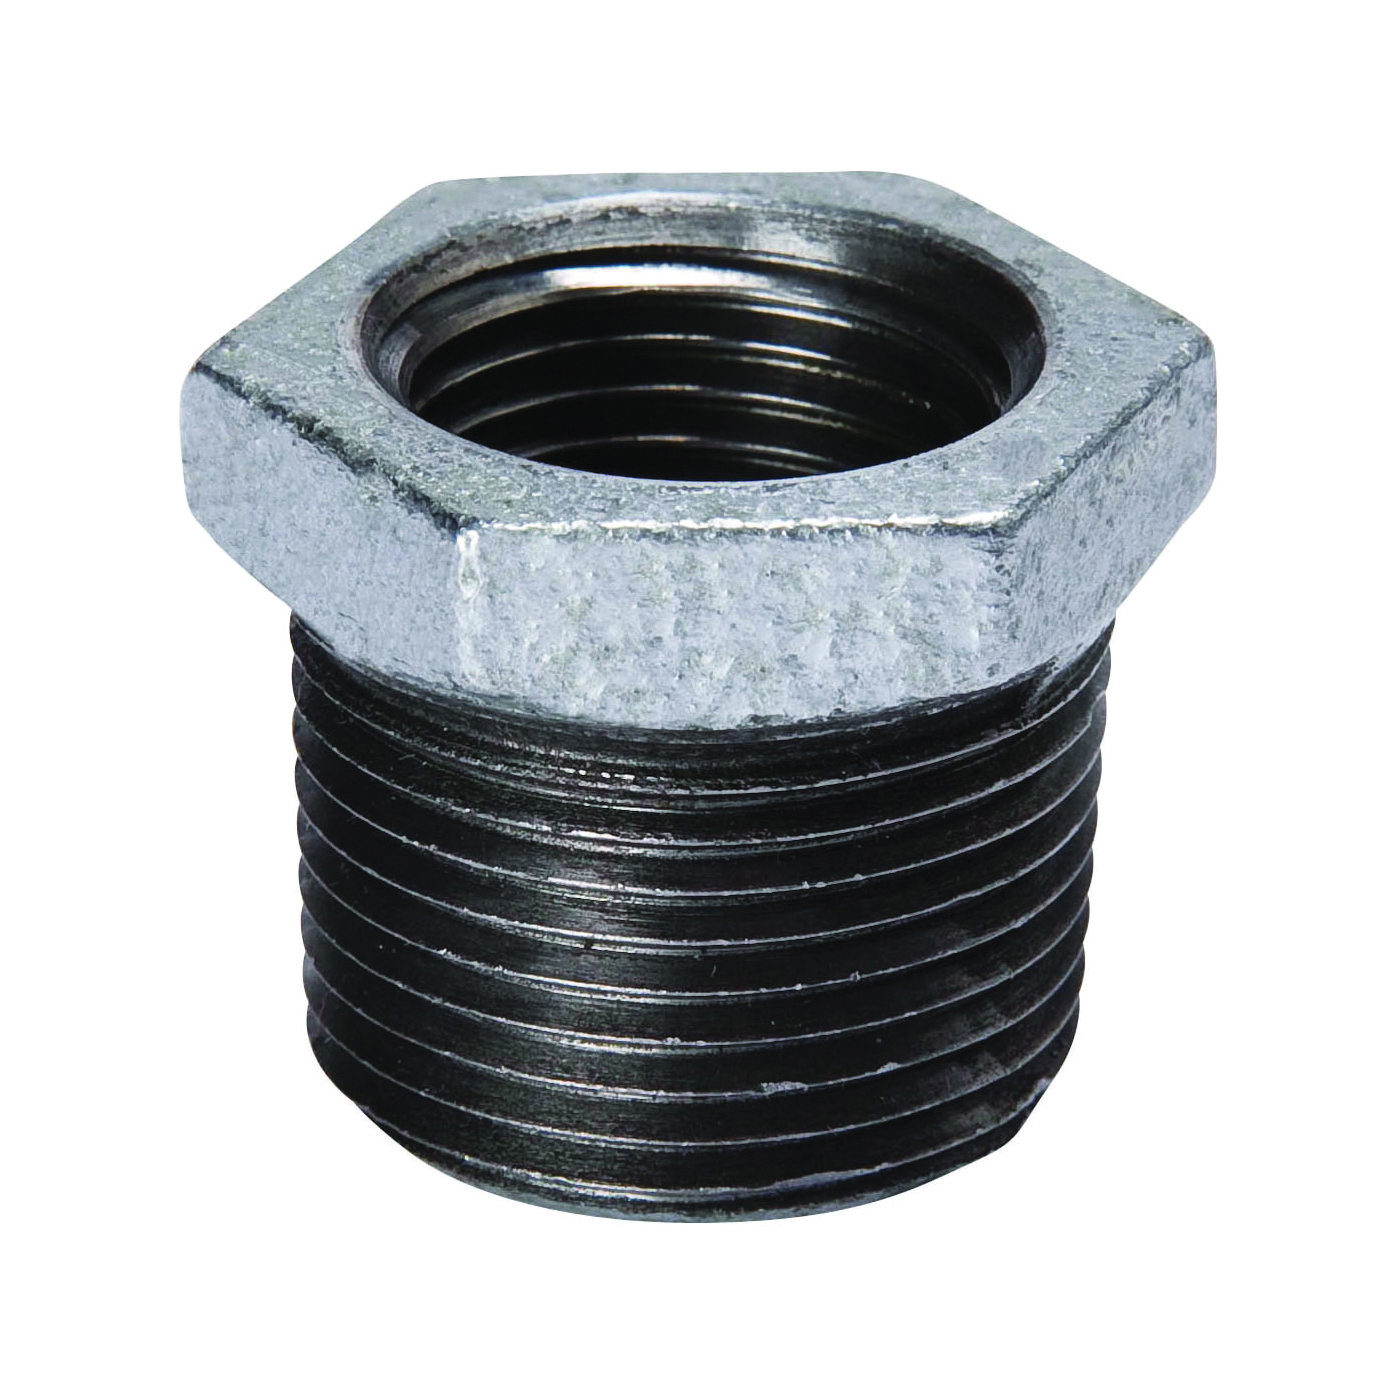 511-907BC Reducing Pipe Bushing, 3 x 1-1/2 in, Male x Female